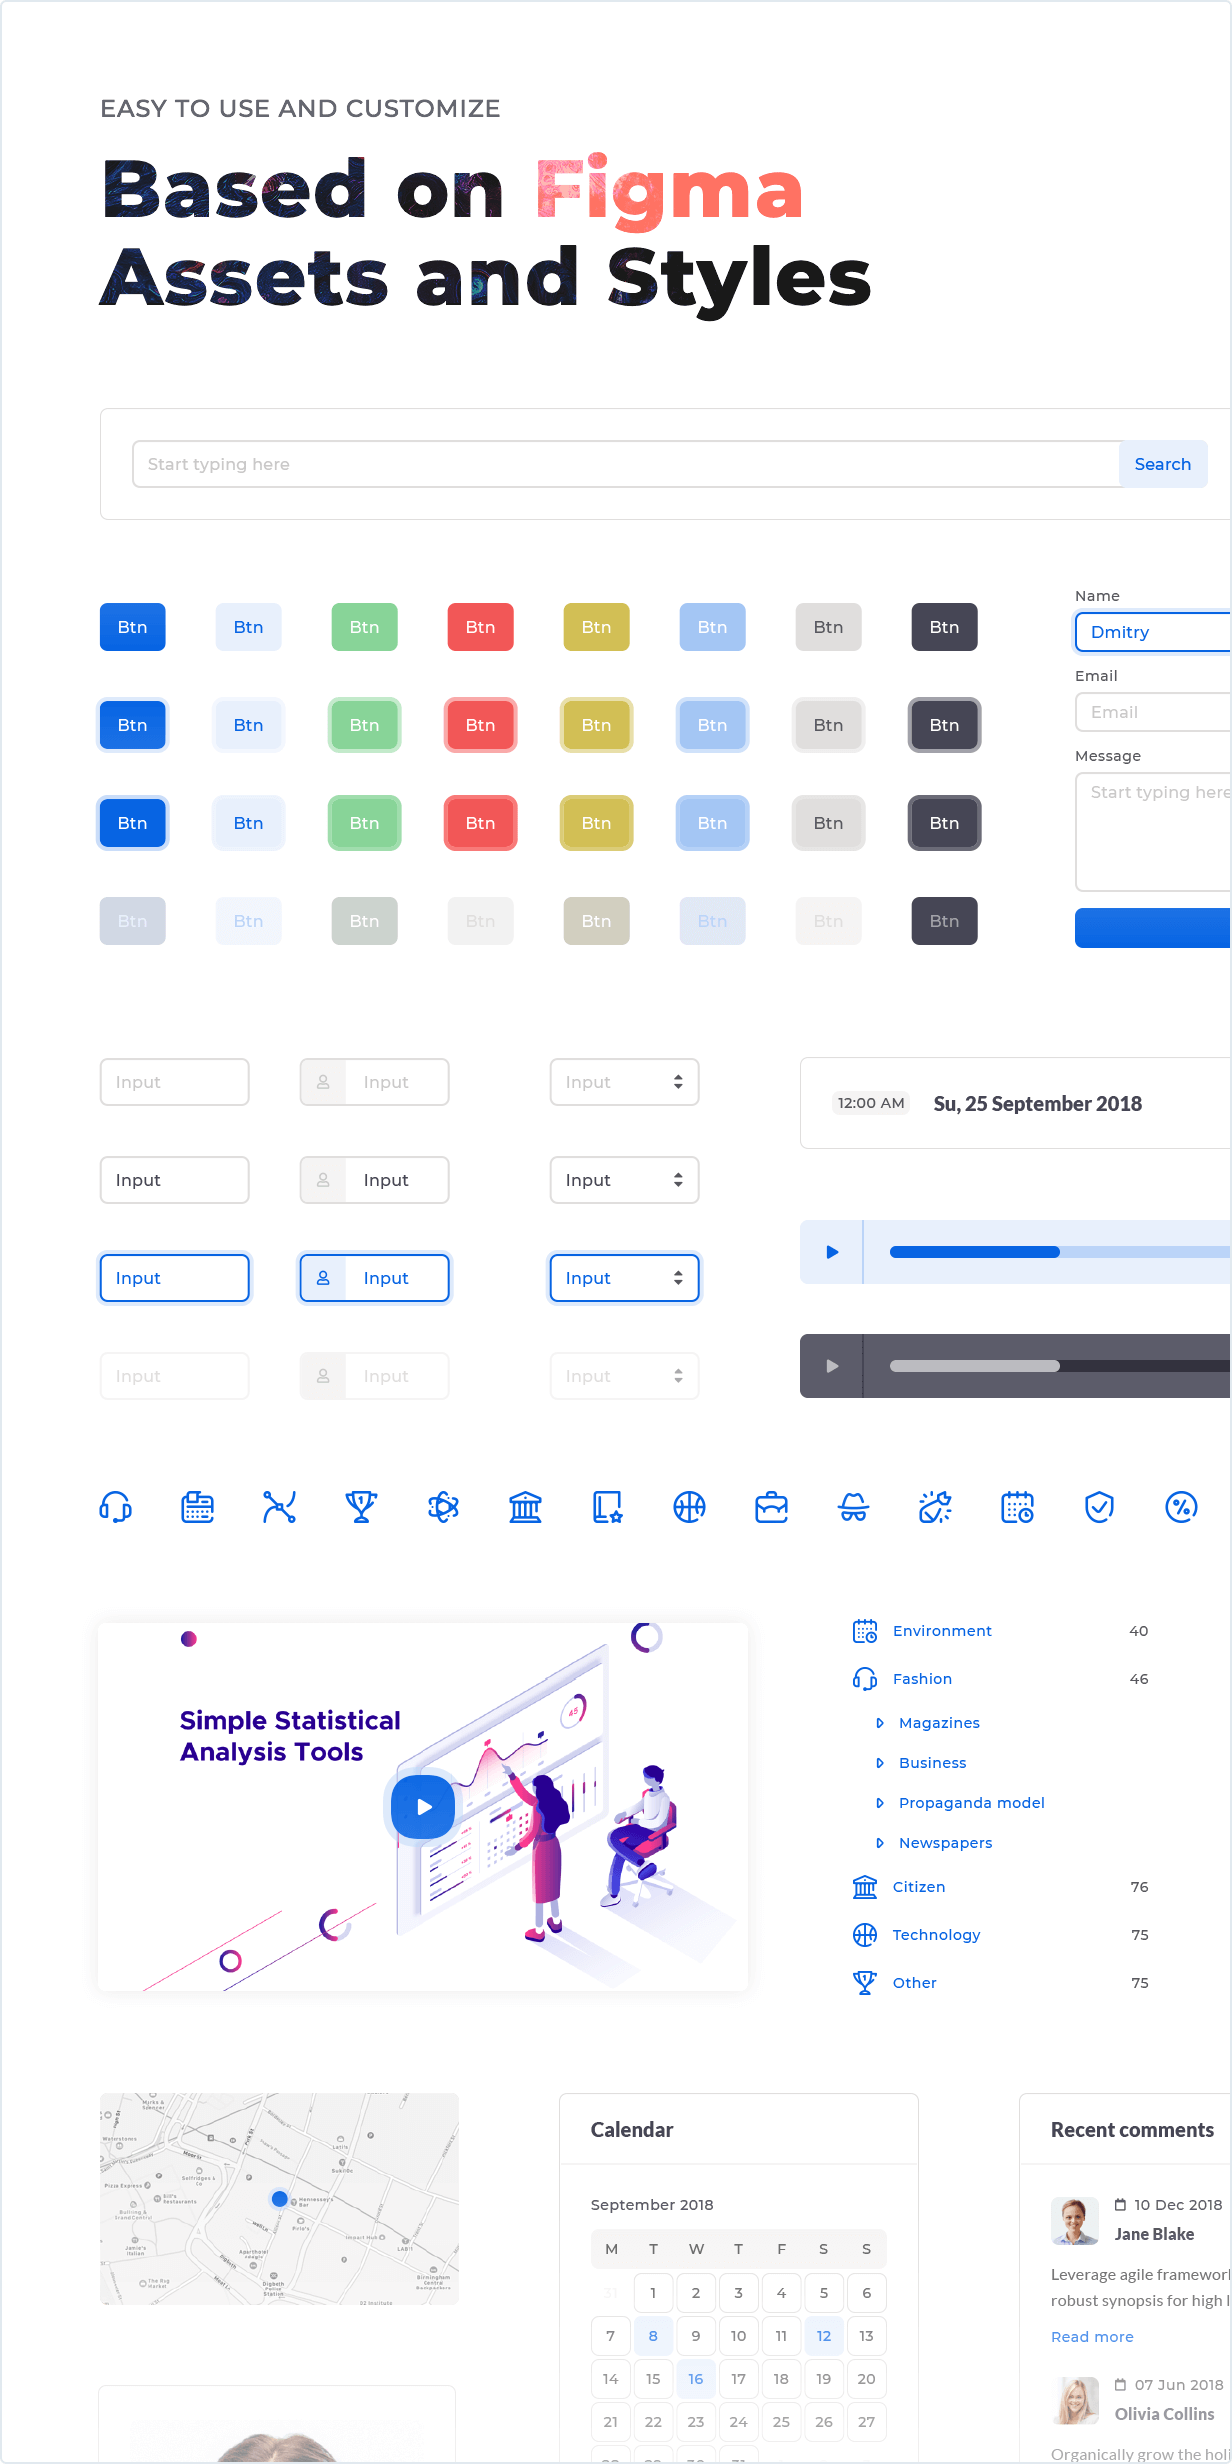 Easy to use and customize – Based on Figma Assets and Styles